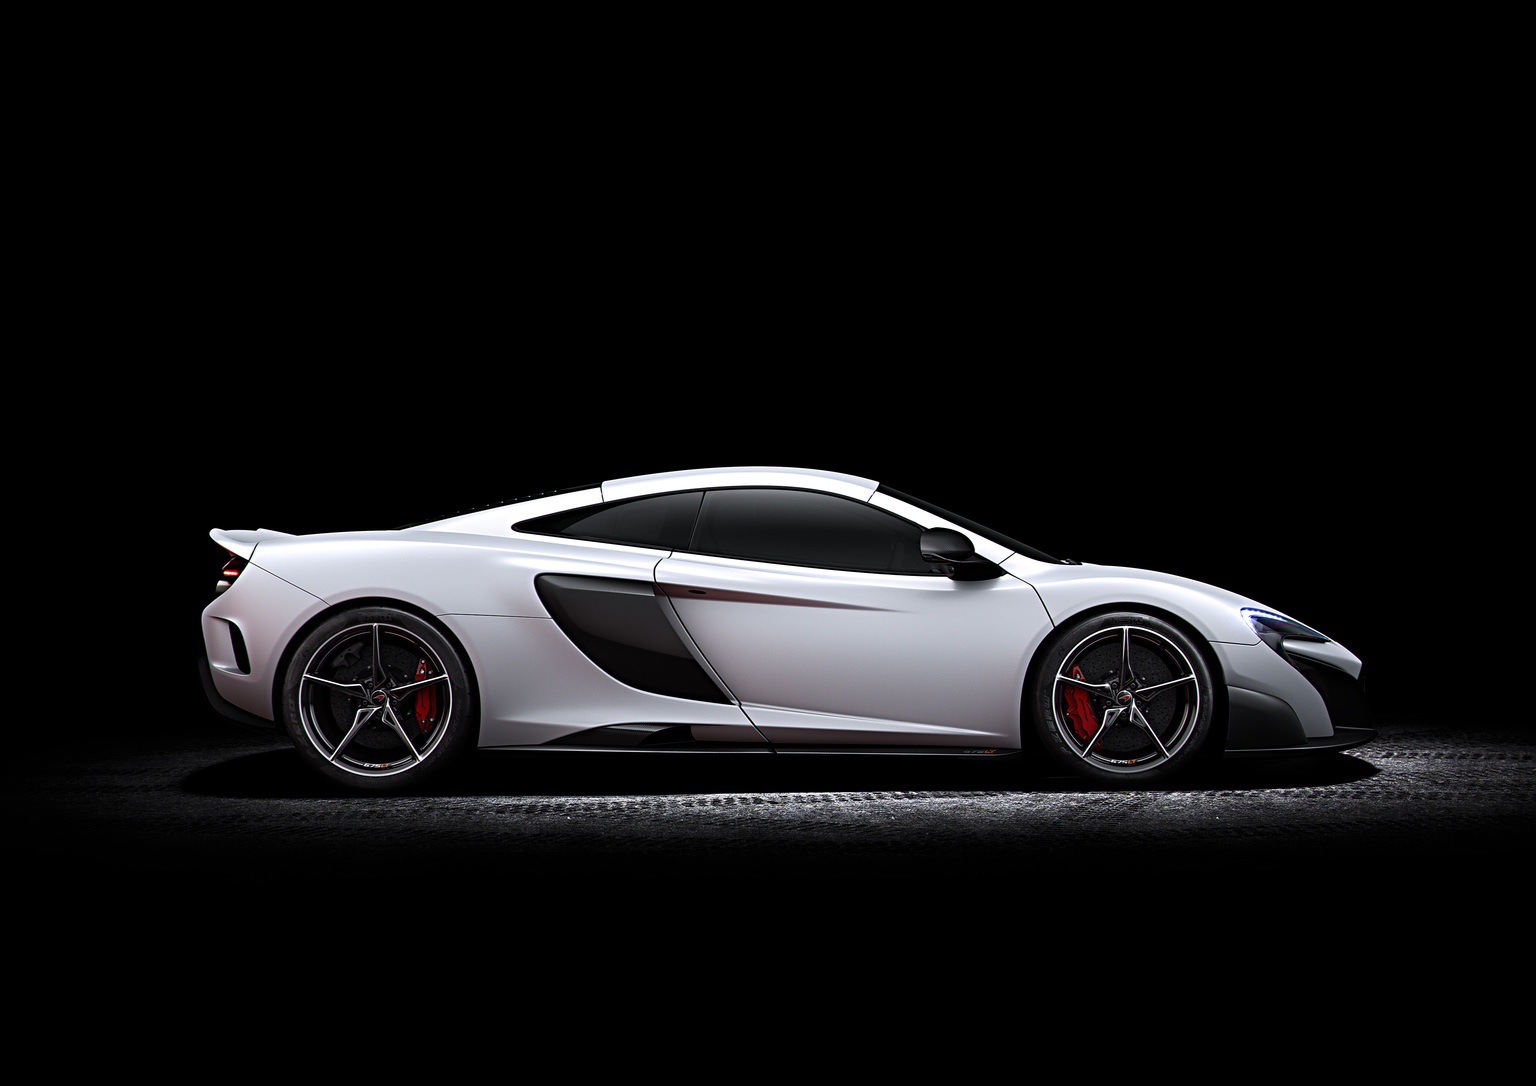 The first special edition car by MSO, the 2015 McLaren 675LT, a longer, lower, more powerful version of the 650S coupe